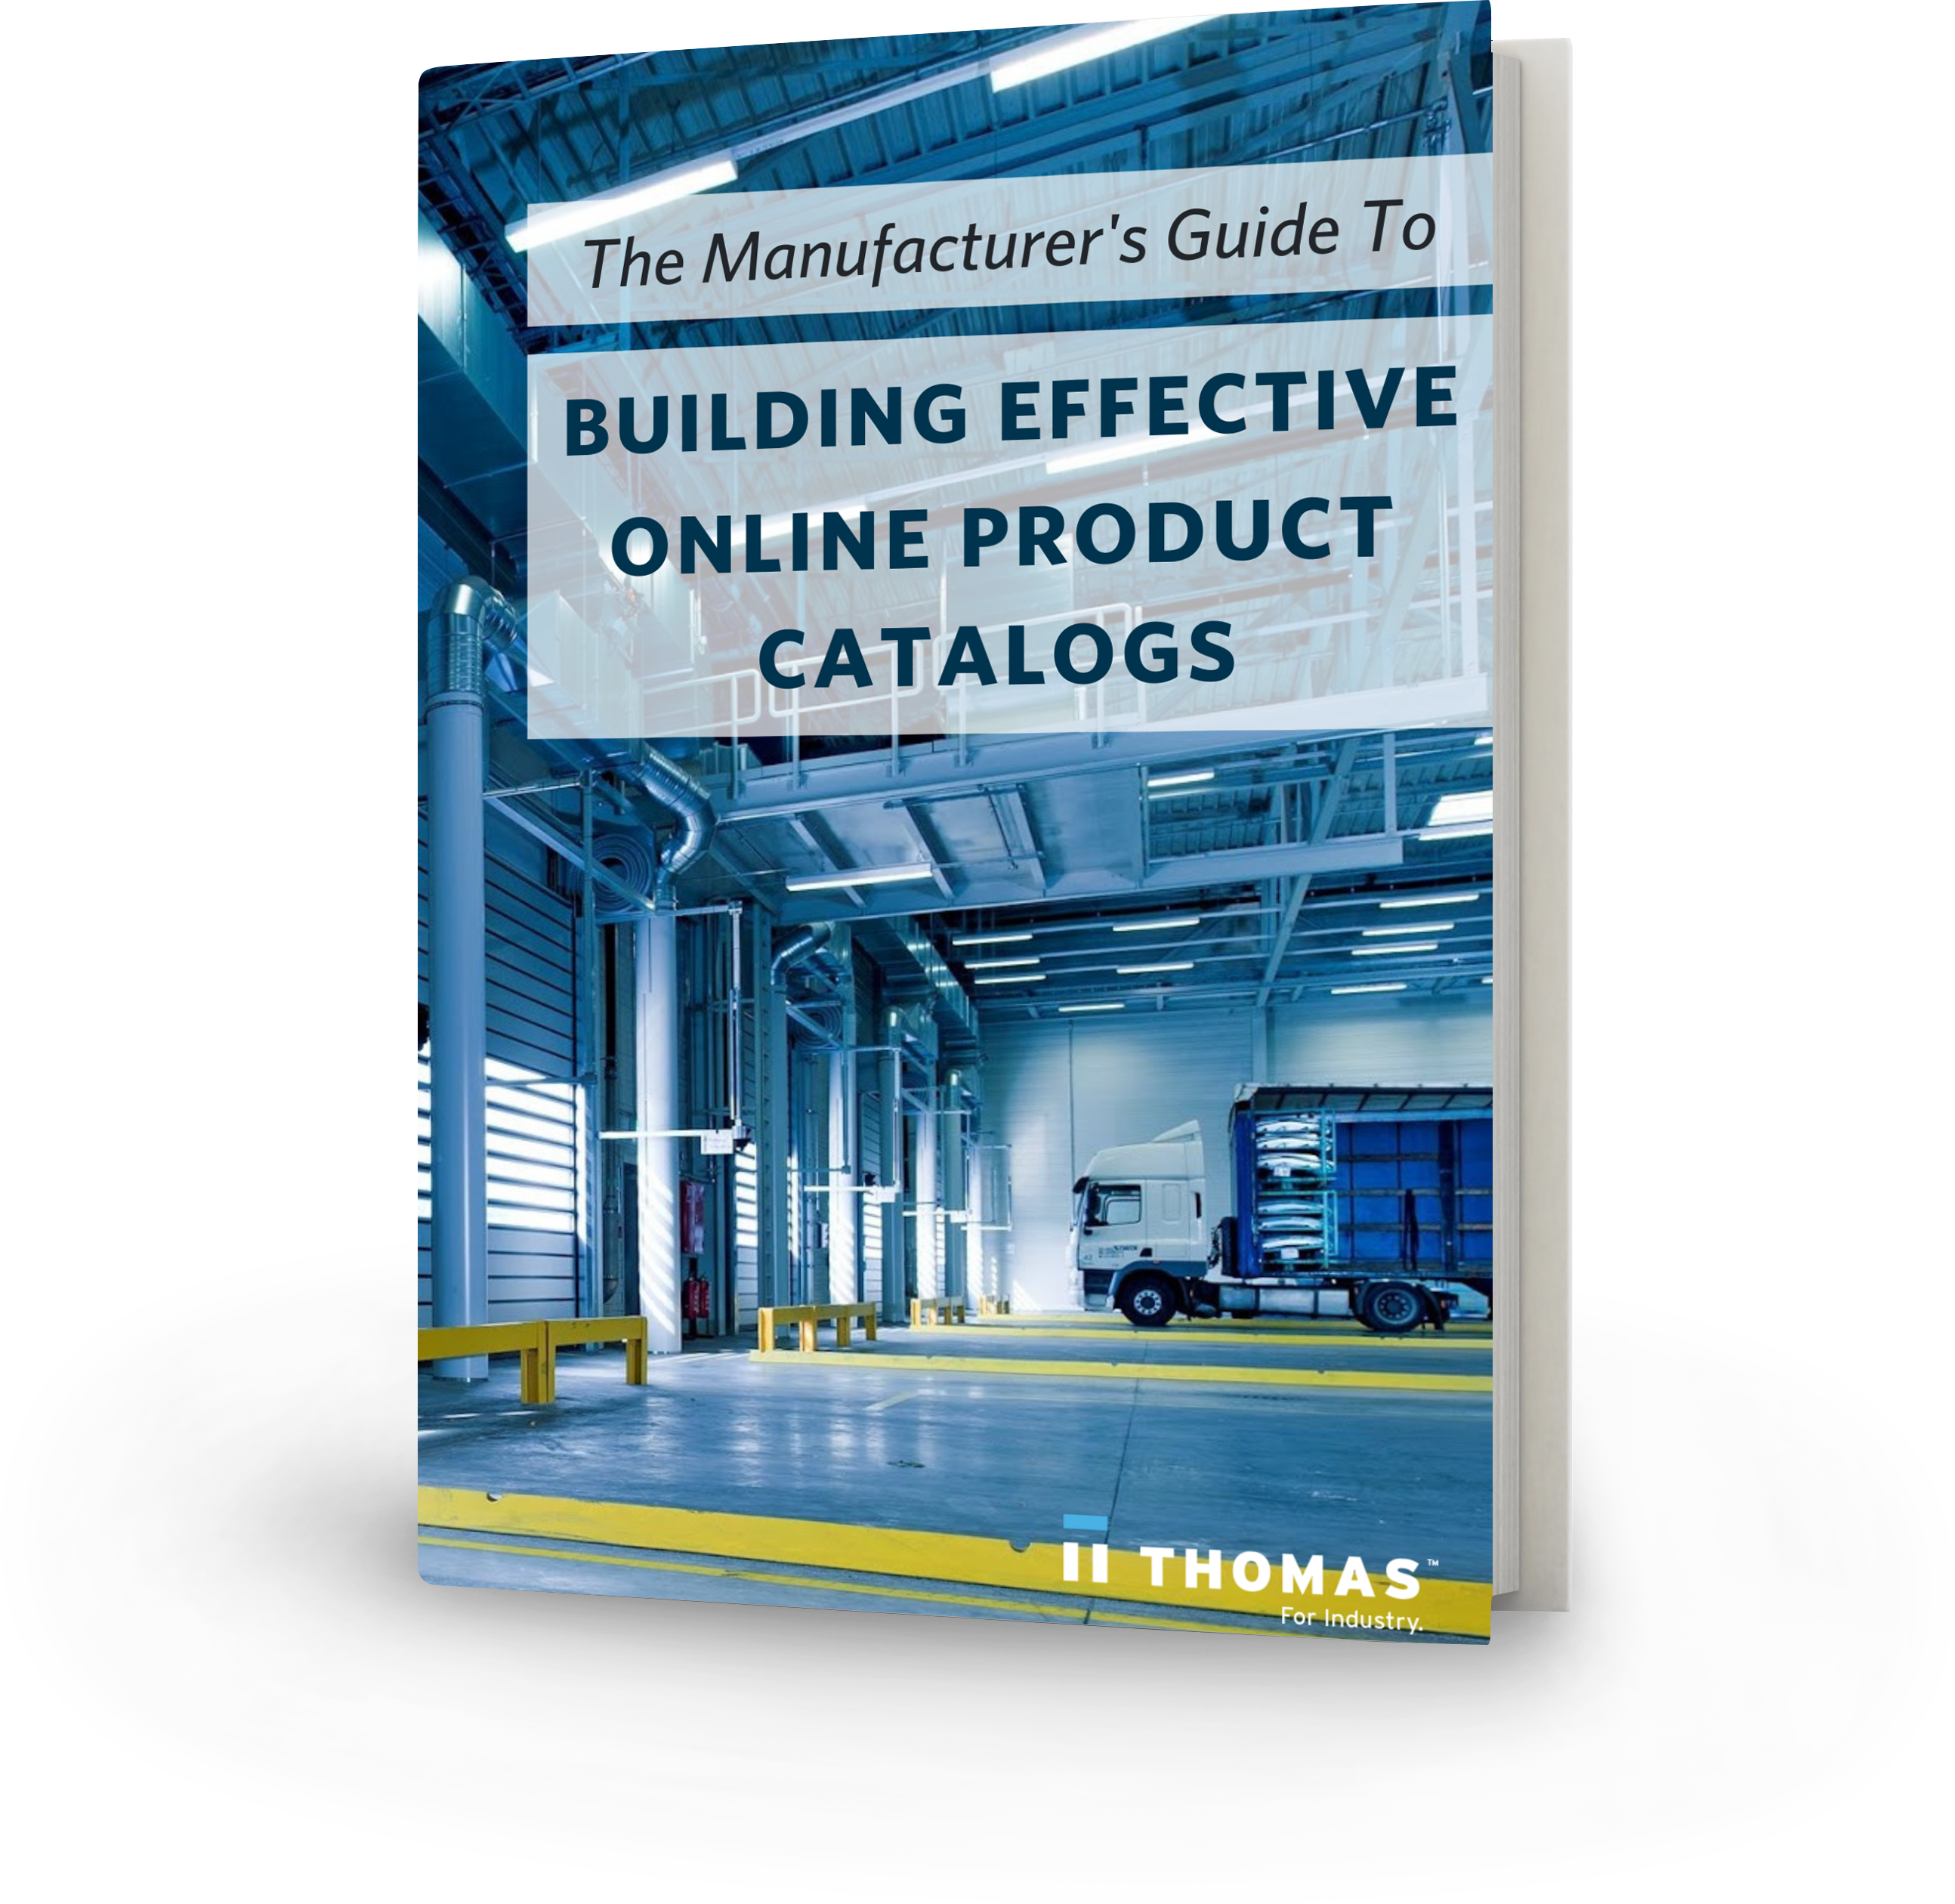 The Manufacturer’s Guide To Building Effective Online Product Catalogs